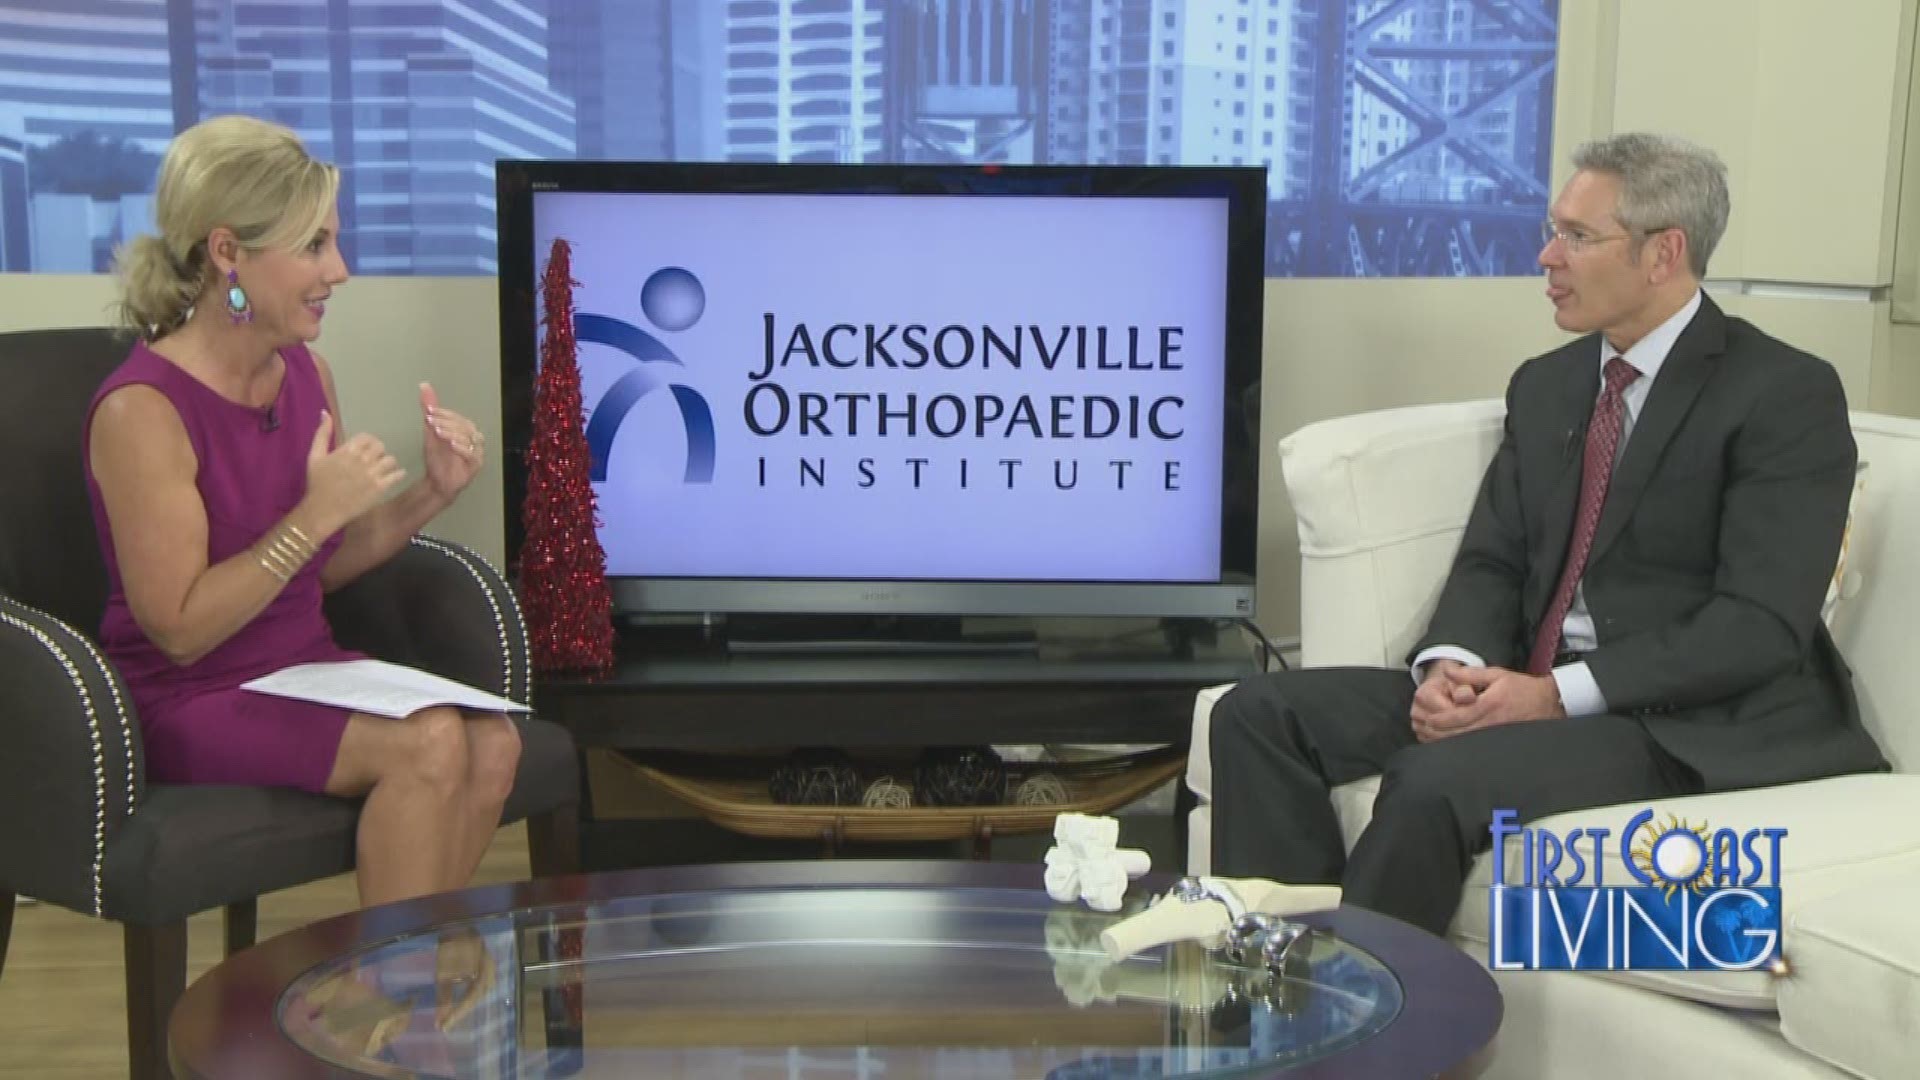 The Jacksonville Orthopaedic Institute with Dr. Richard Grimsley